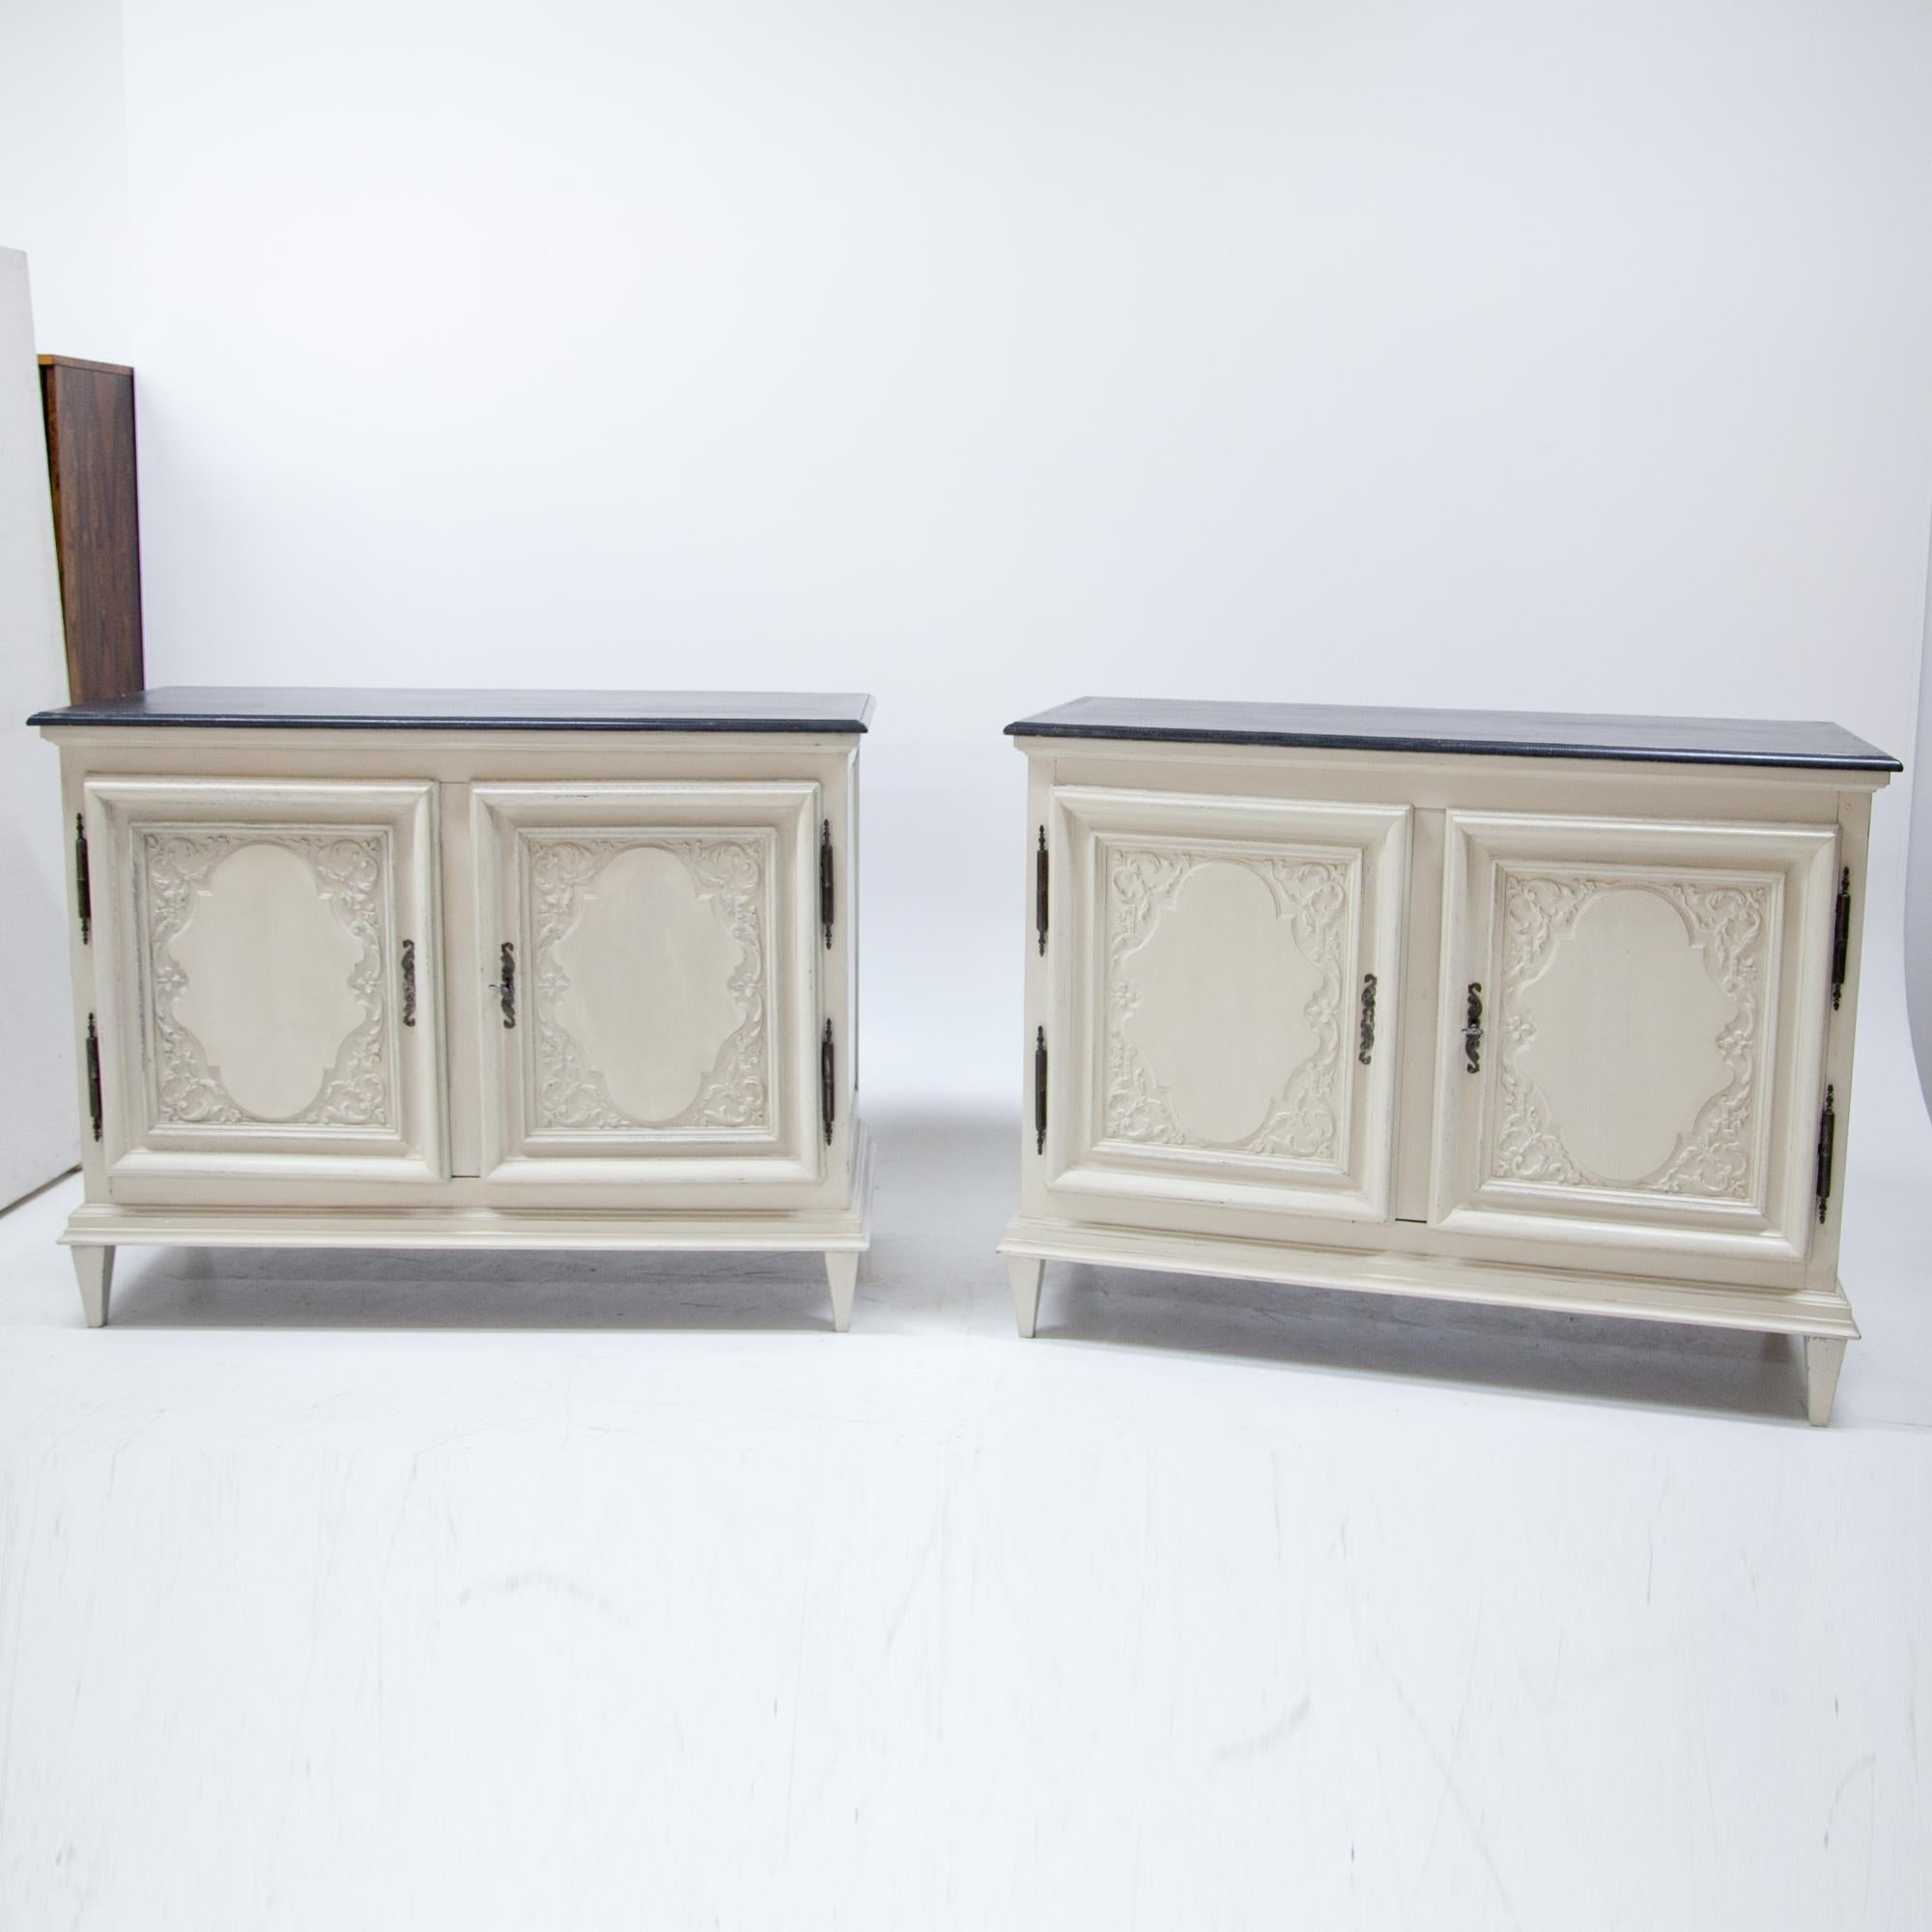 Pair of two-doored buffets out of solid walnut, standing on tapered legs. The buffets are decorated with profiled edges and fillings with carved vines and wavy medallions. The crème and grey paint is new and has a slight distressed look to it. Legs